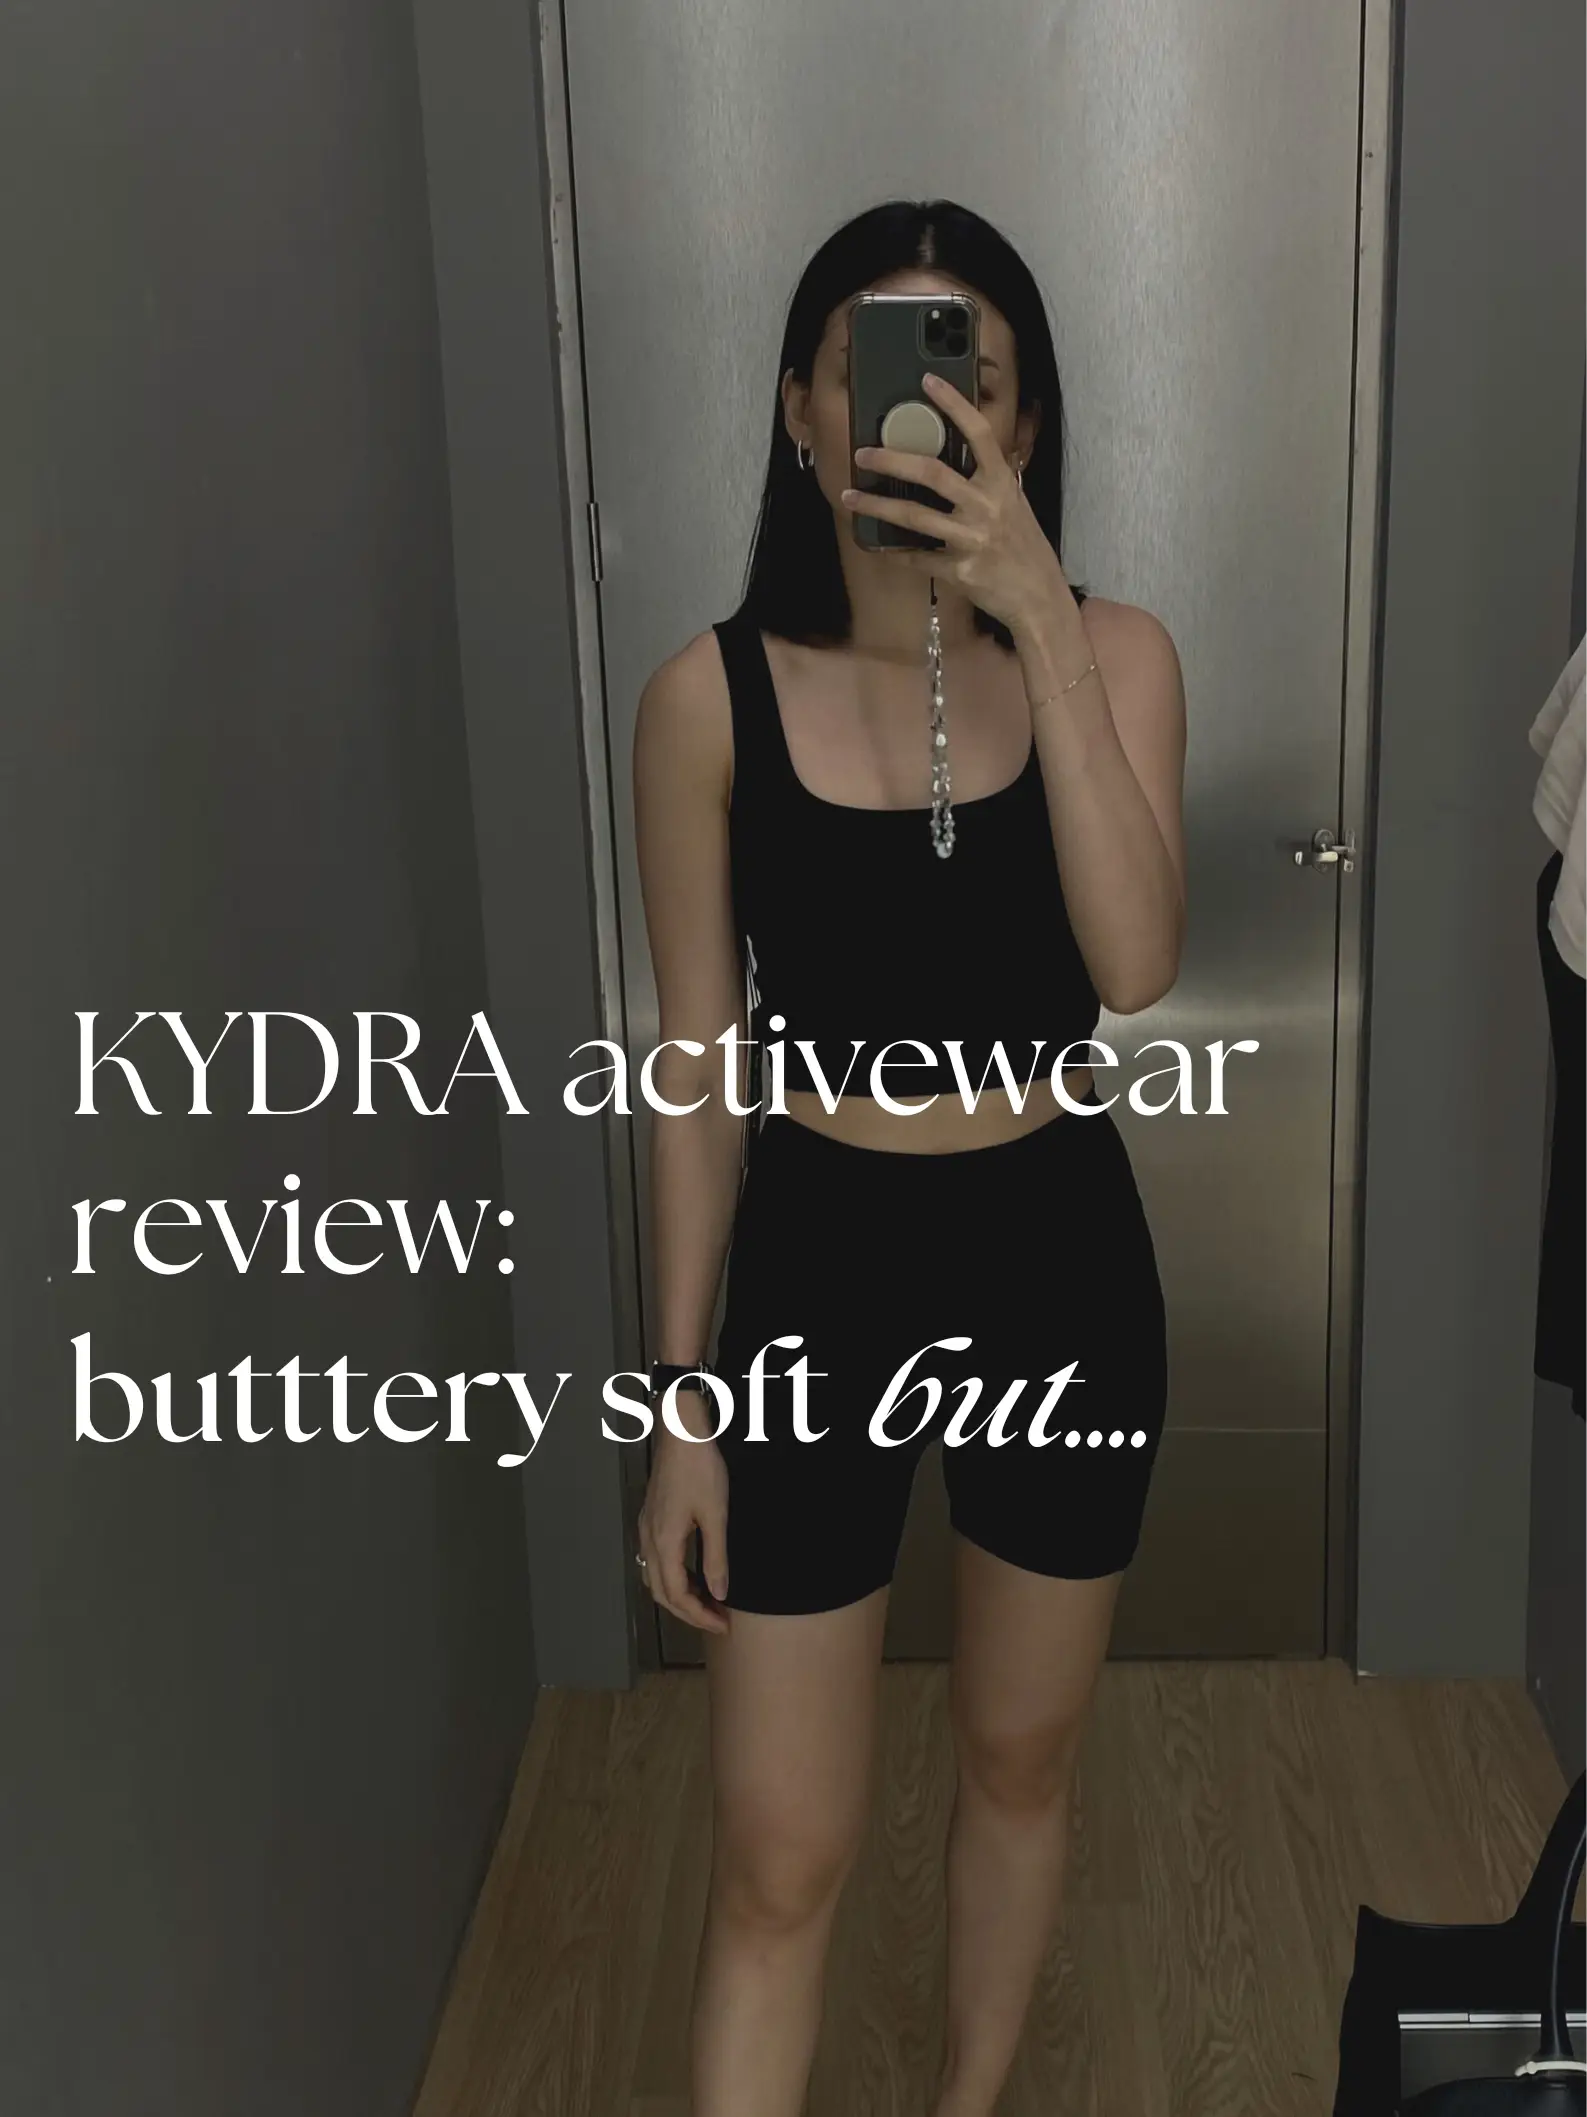 Kydra Activewear Dilemma: An Honest Review 🧘🏻‍♀️, Gallery posted by Rie  ☁️